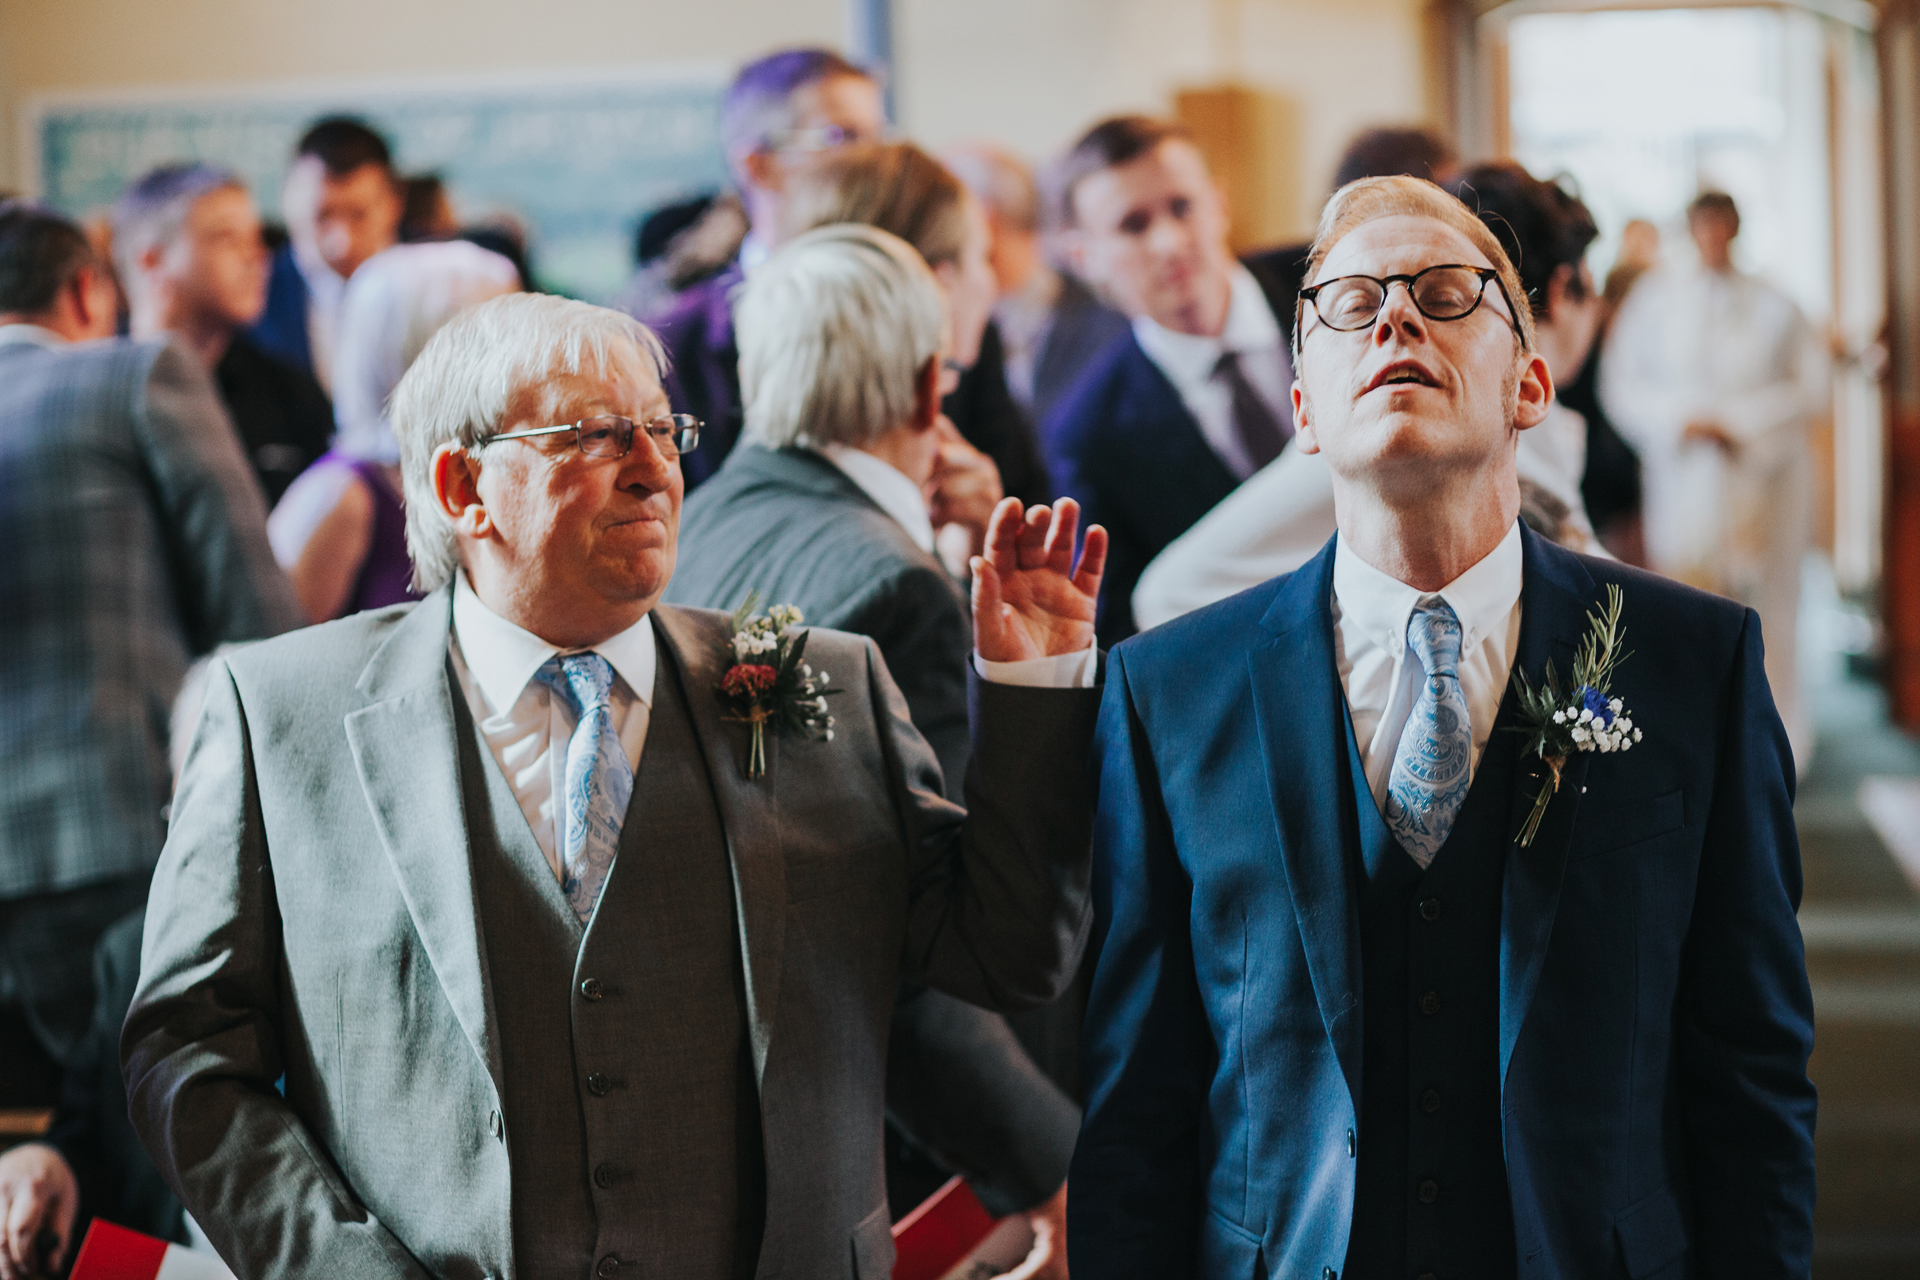 Grooms Dad comforts groom as he stands at the end of the aisle waiting for bride. 